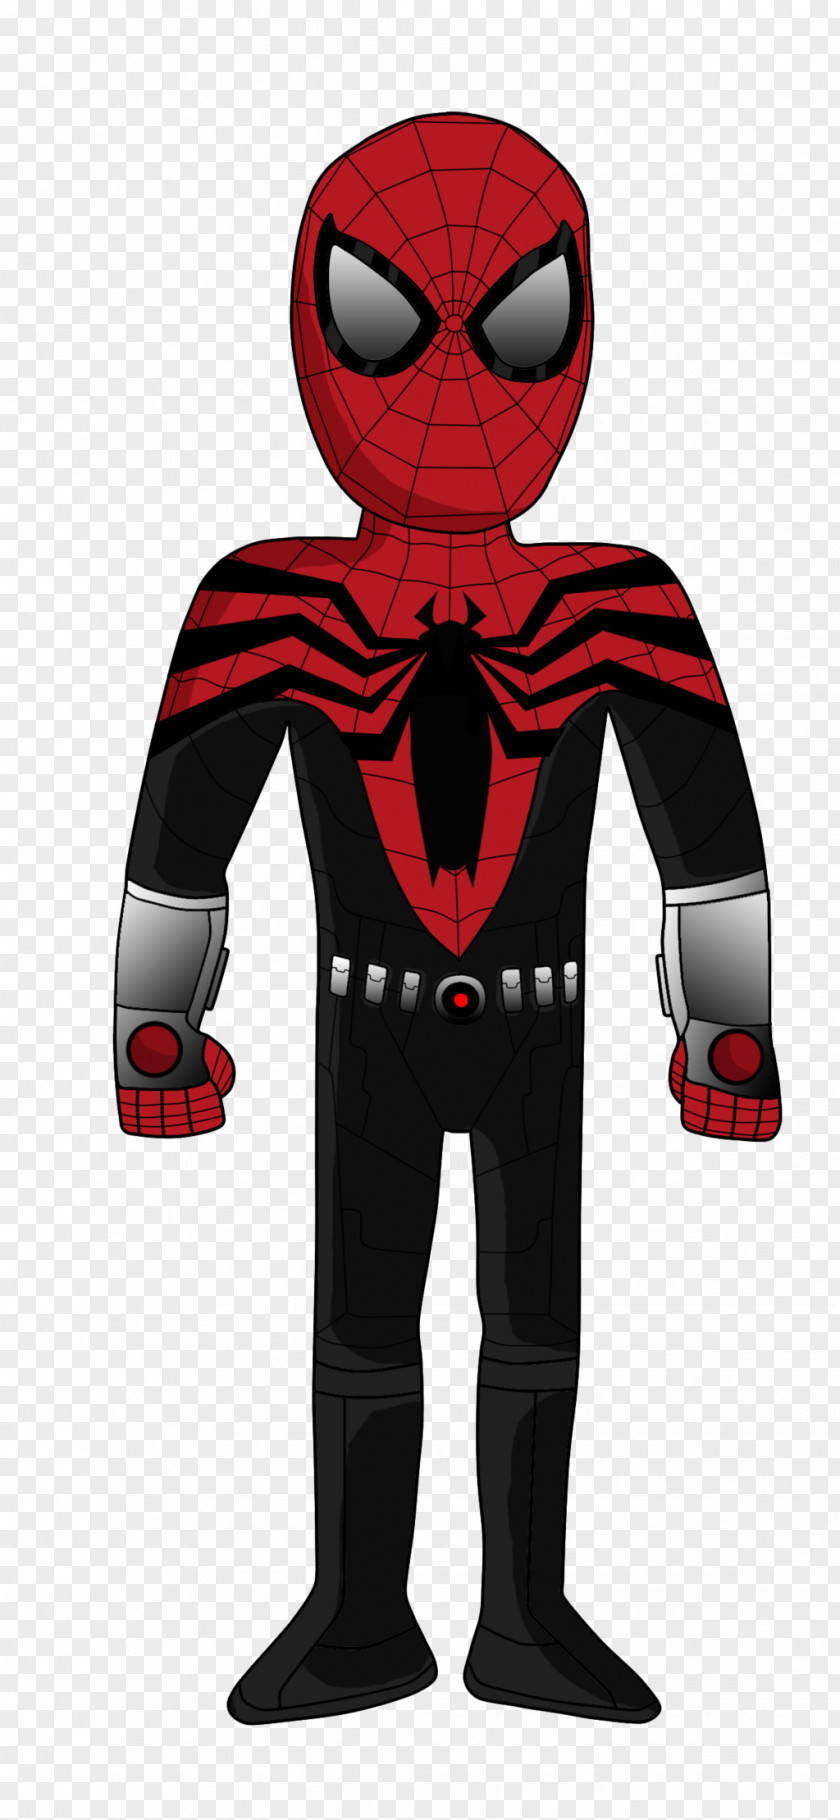 Spider-man The Superior Spider-Man Costume Spider-Man: Homecoming Film Series Ultimate PNG